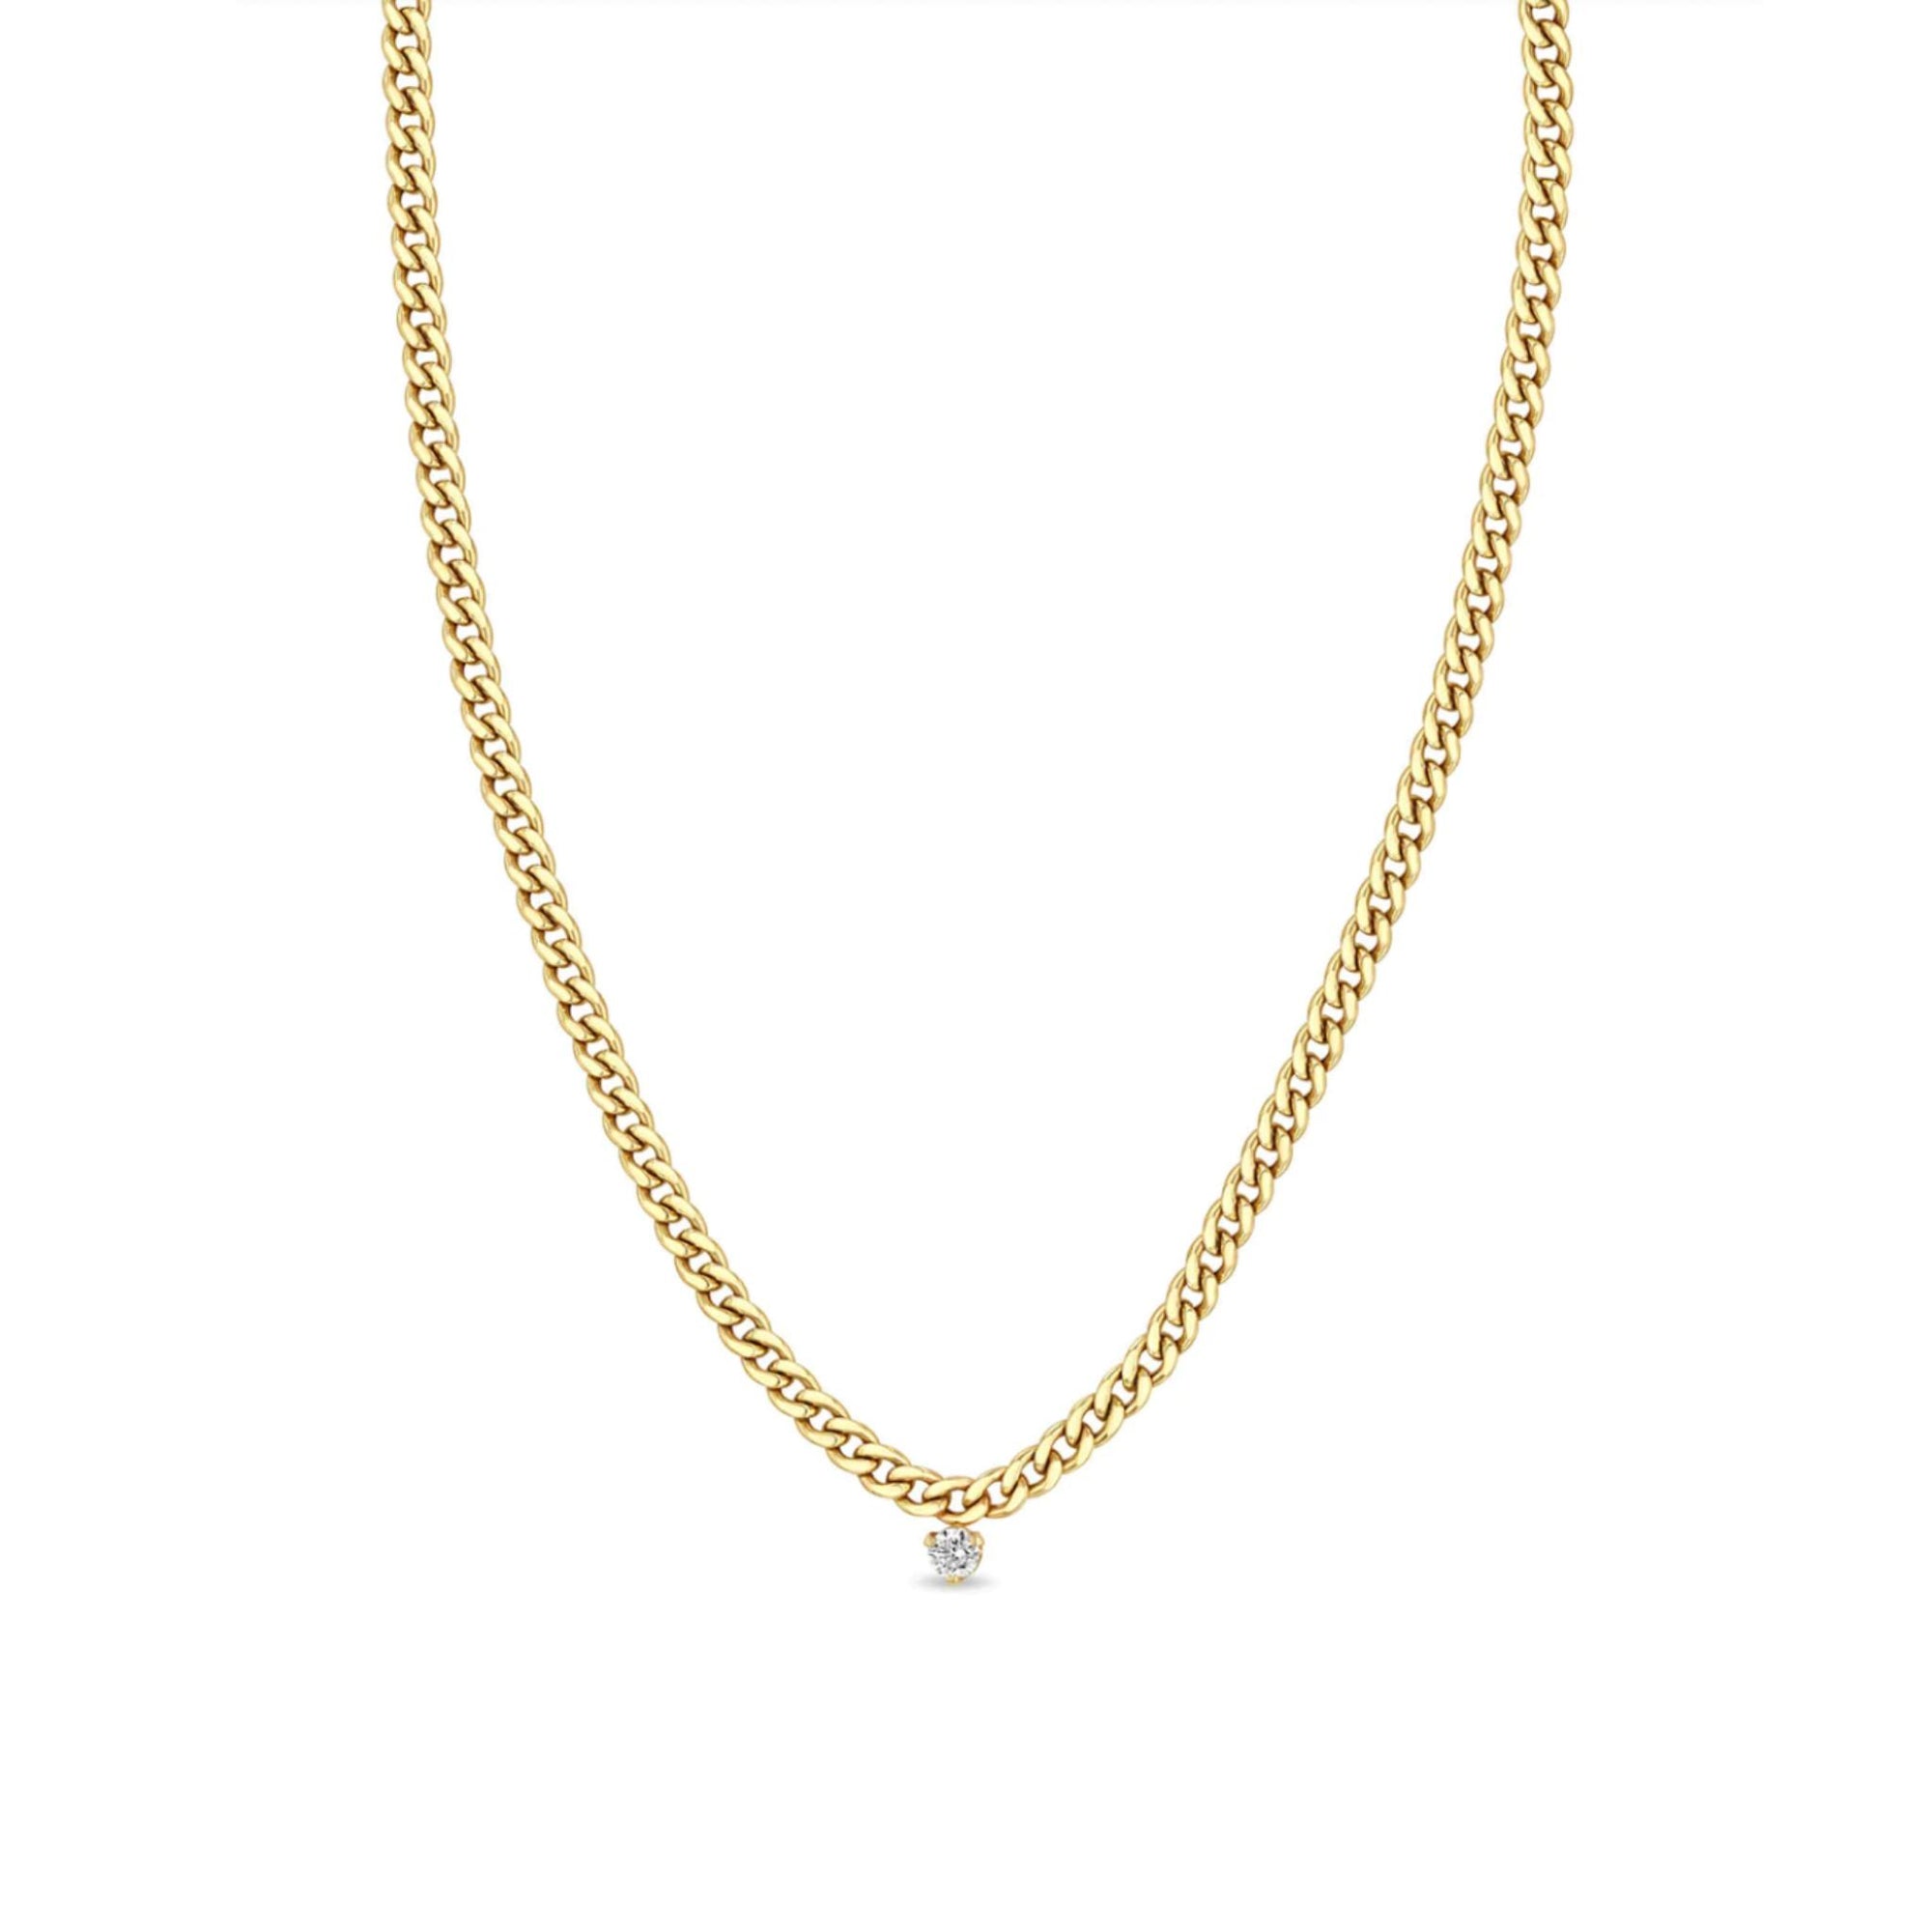 Zoe Chicco 14k Single Prong Diamond Small Curb Chain Necklace